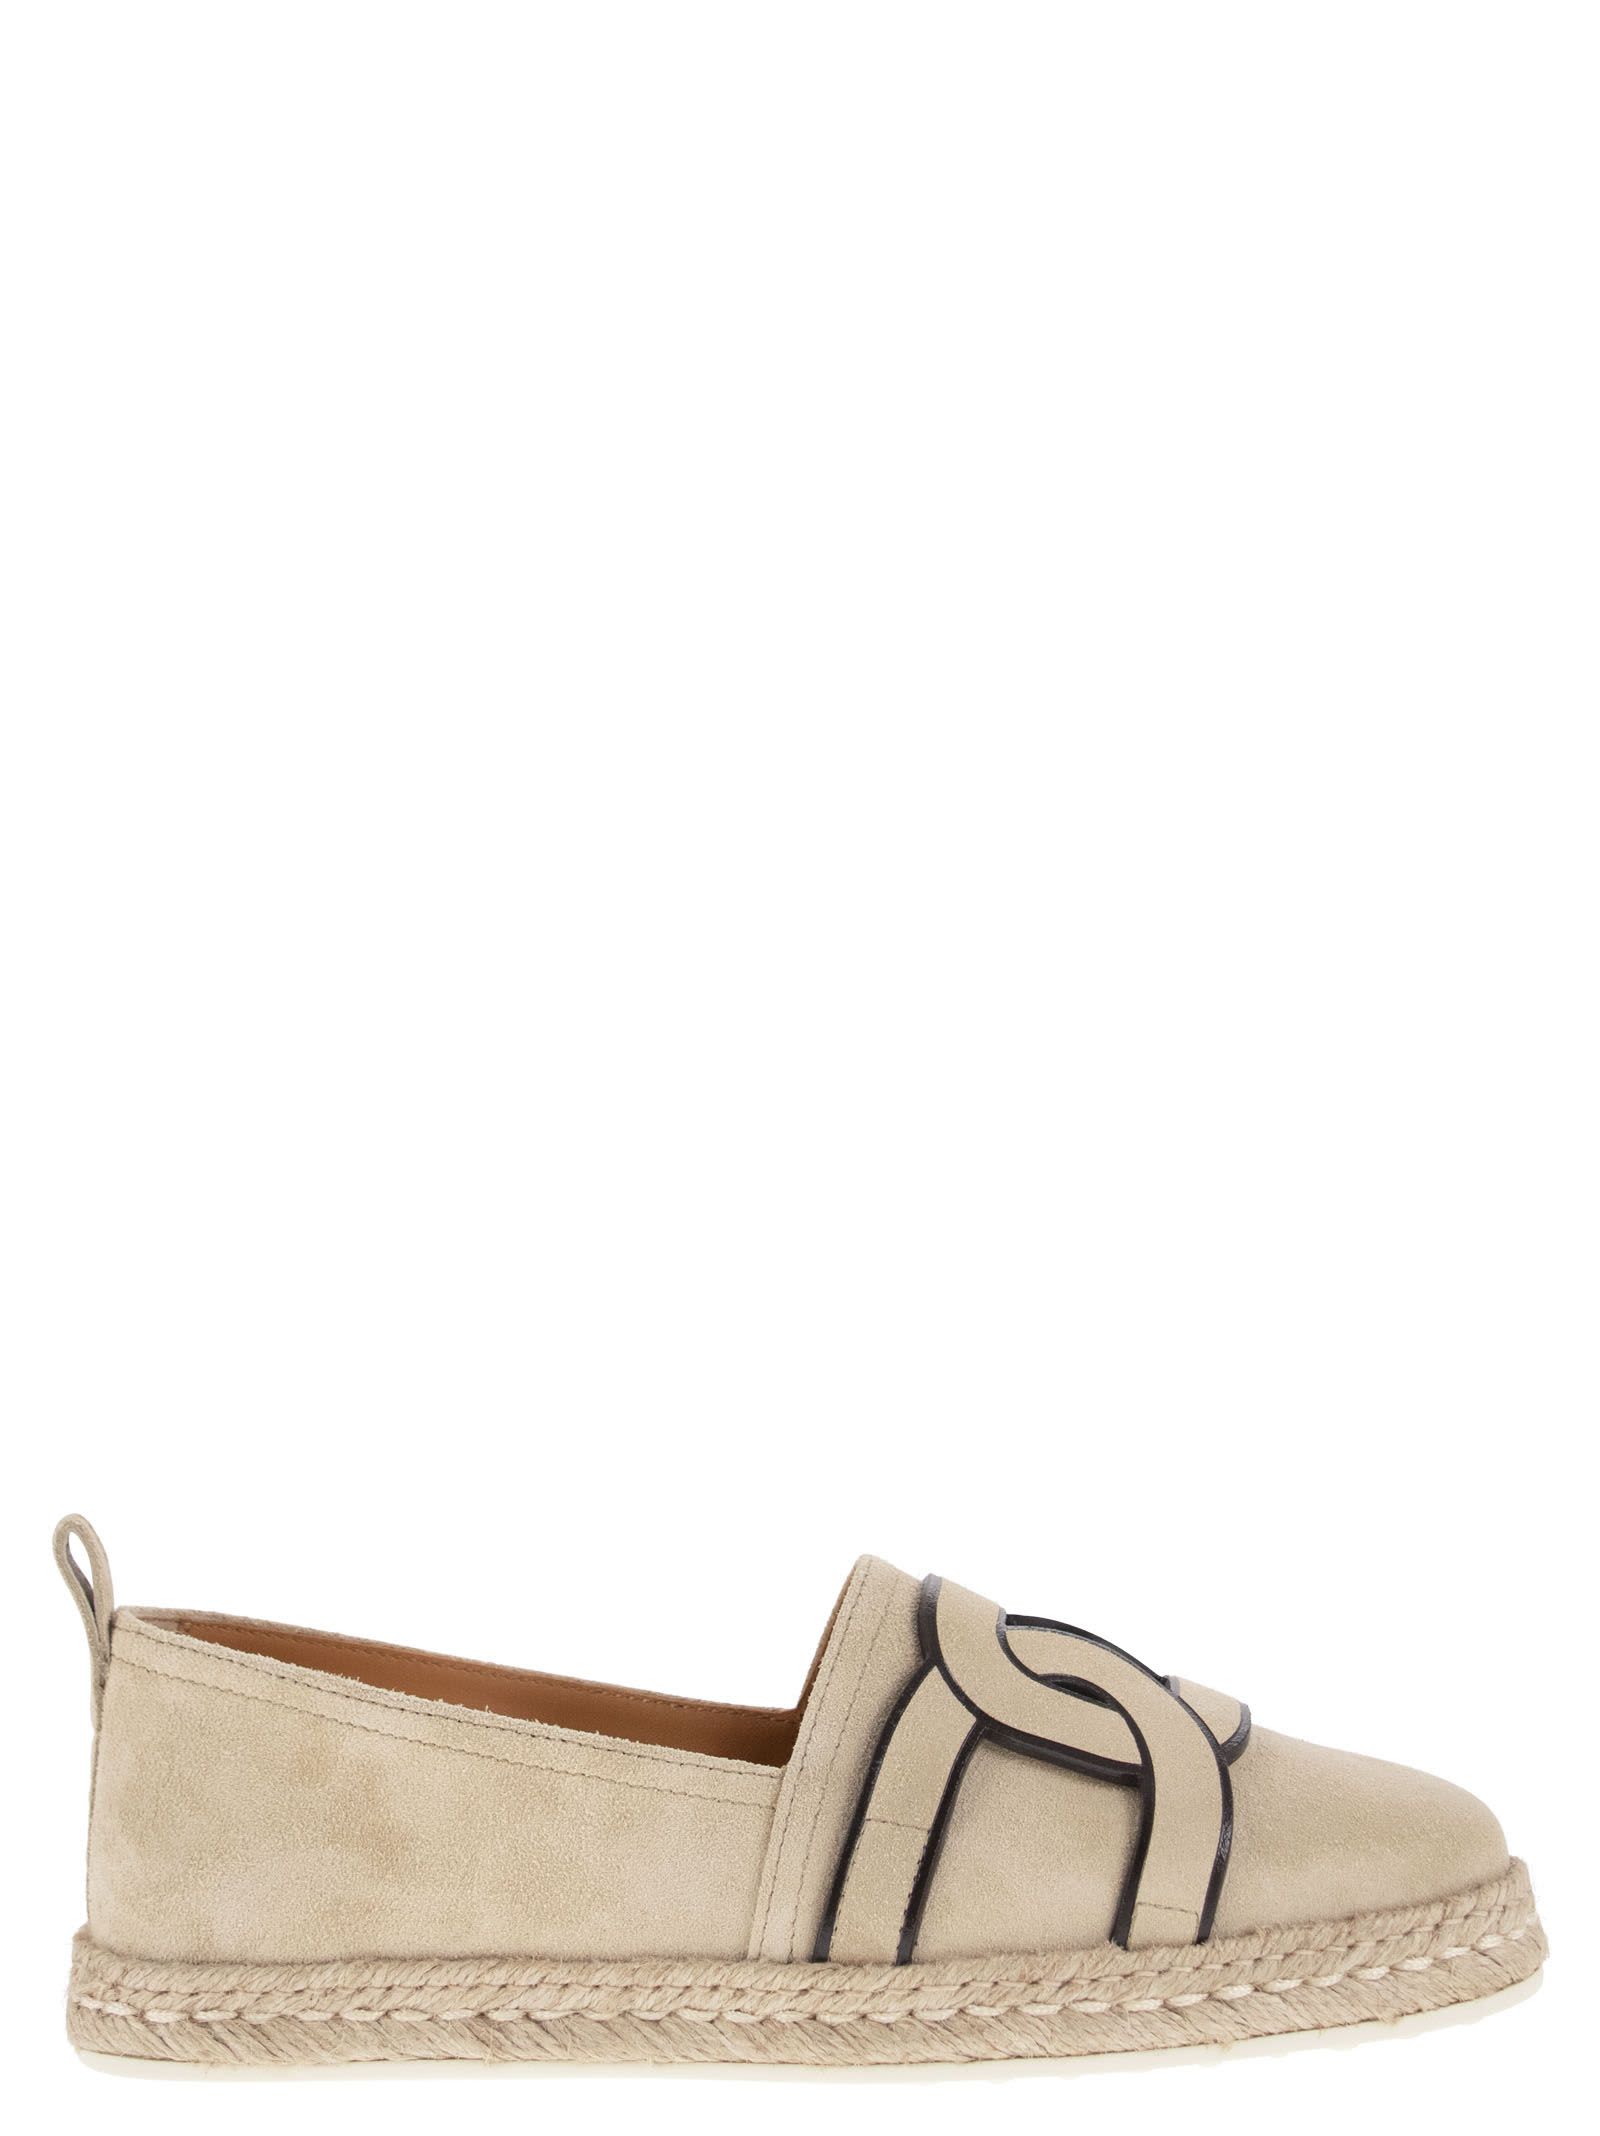 TOD'S KATE - SUEDE SLIP-ON